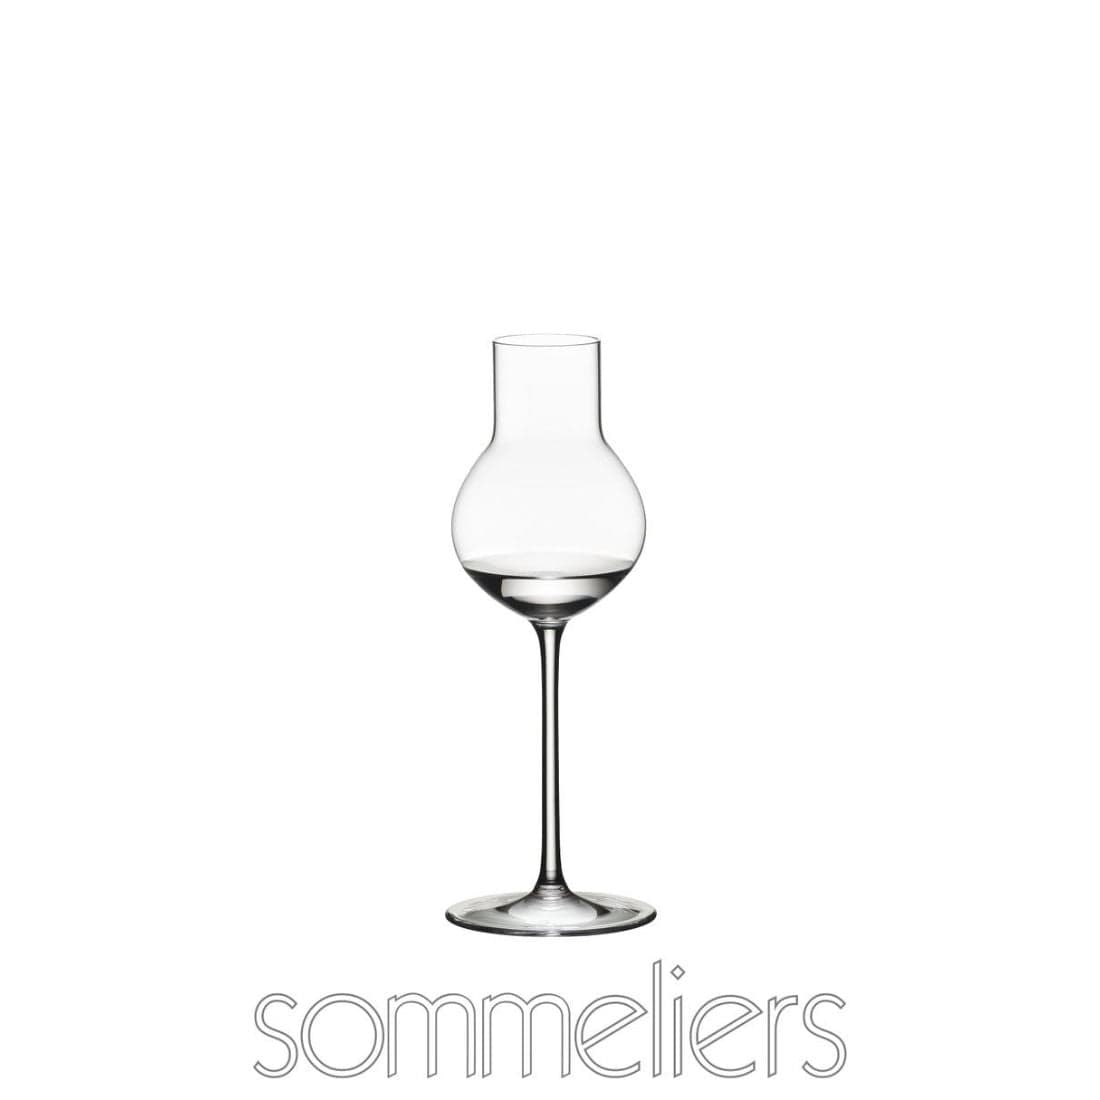 Riedel Sommeliers - Stone Fruit Single Glass (1 Pack)